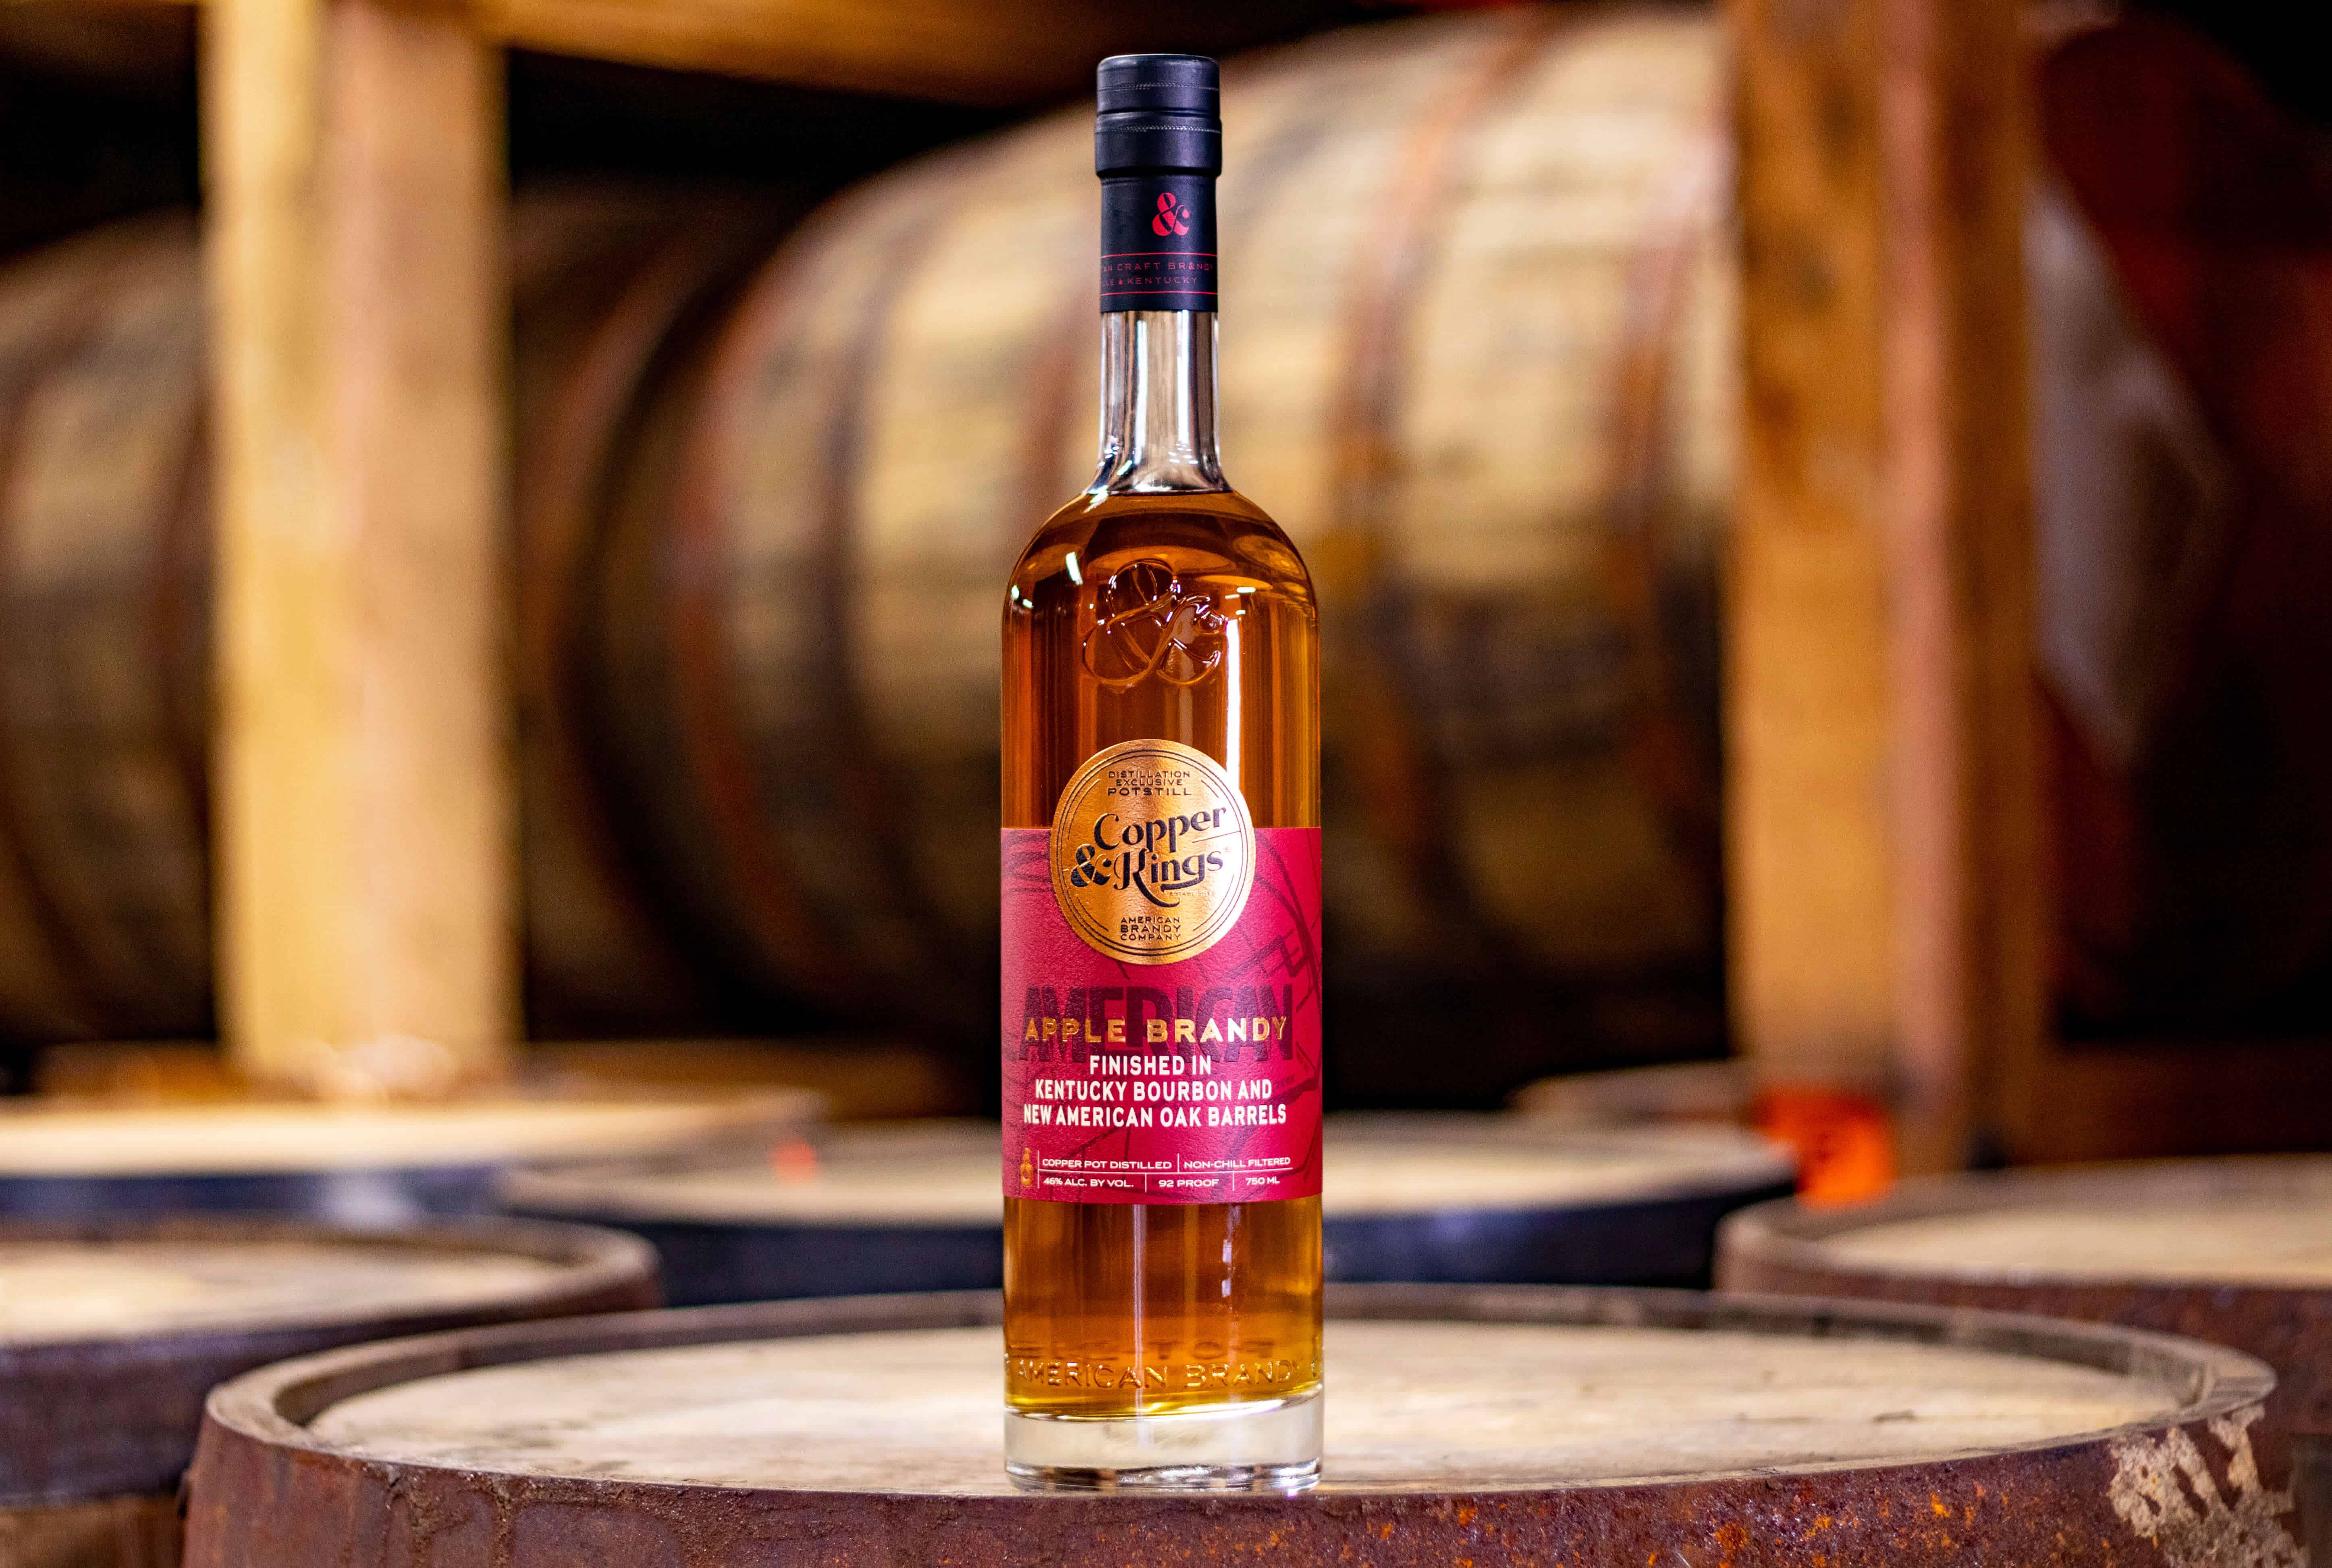 Editorial Barrels04 - Copper & Kings Launches American Craft Apple Brandy Aged in Kentucky Bourbon and New American Oak Barrels 